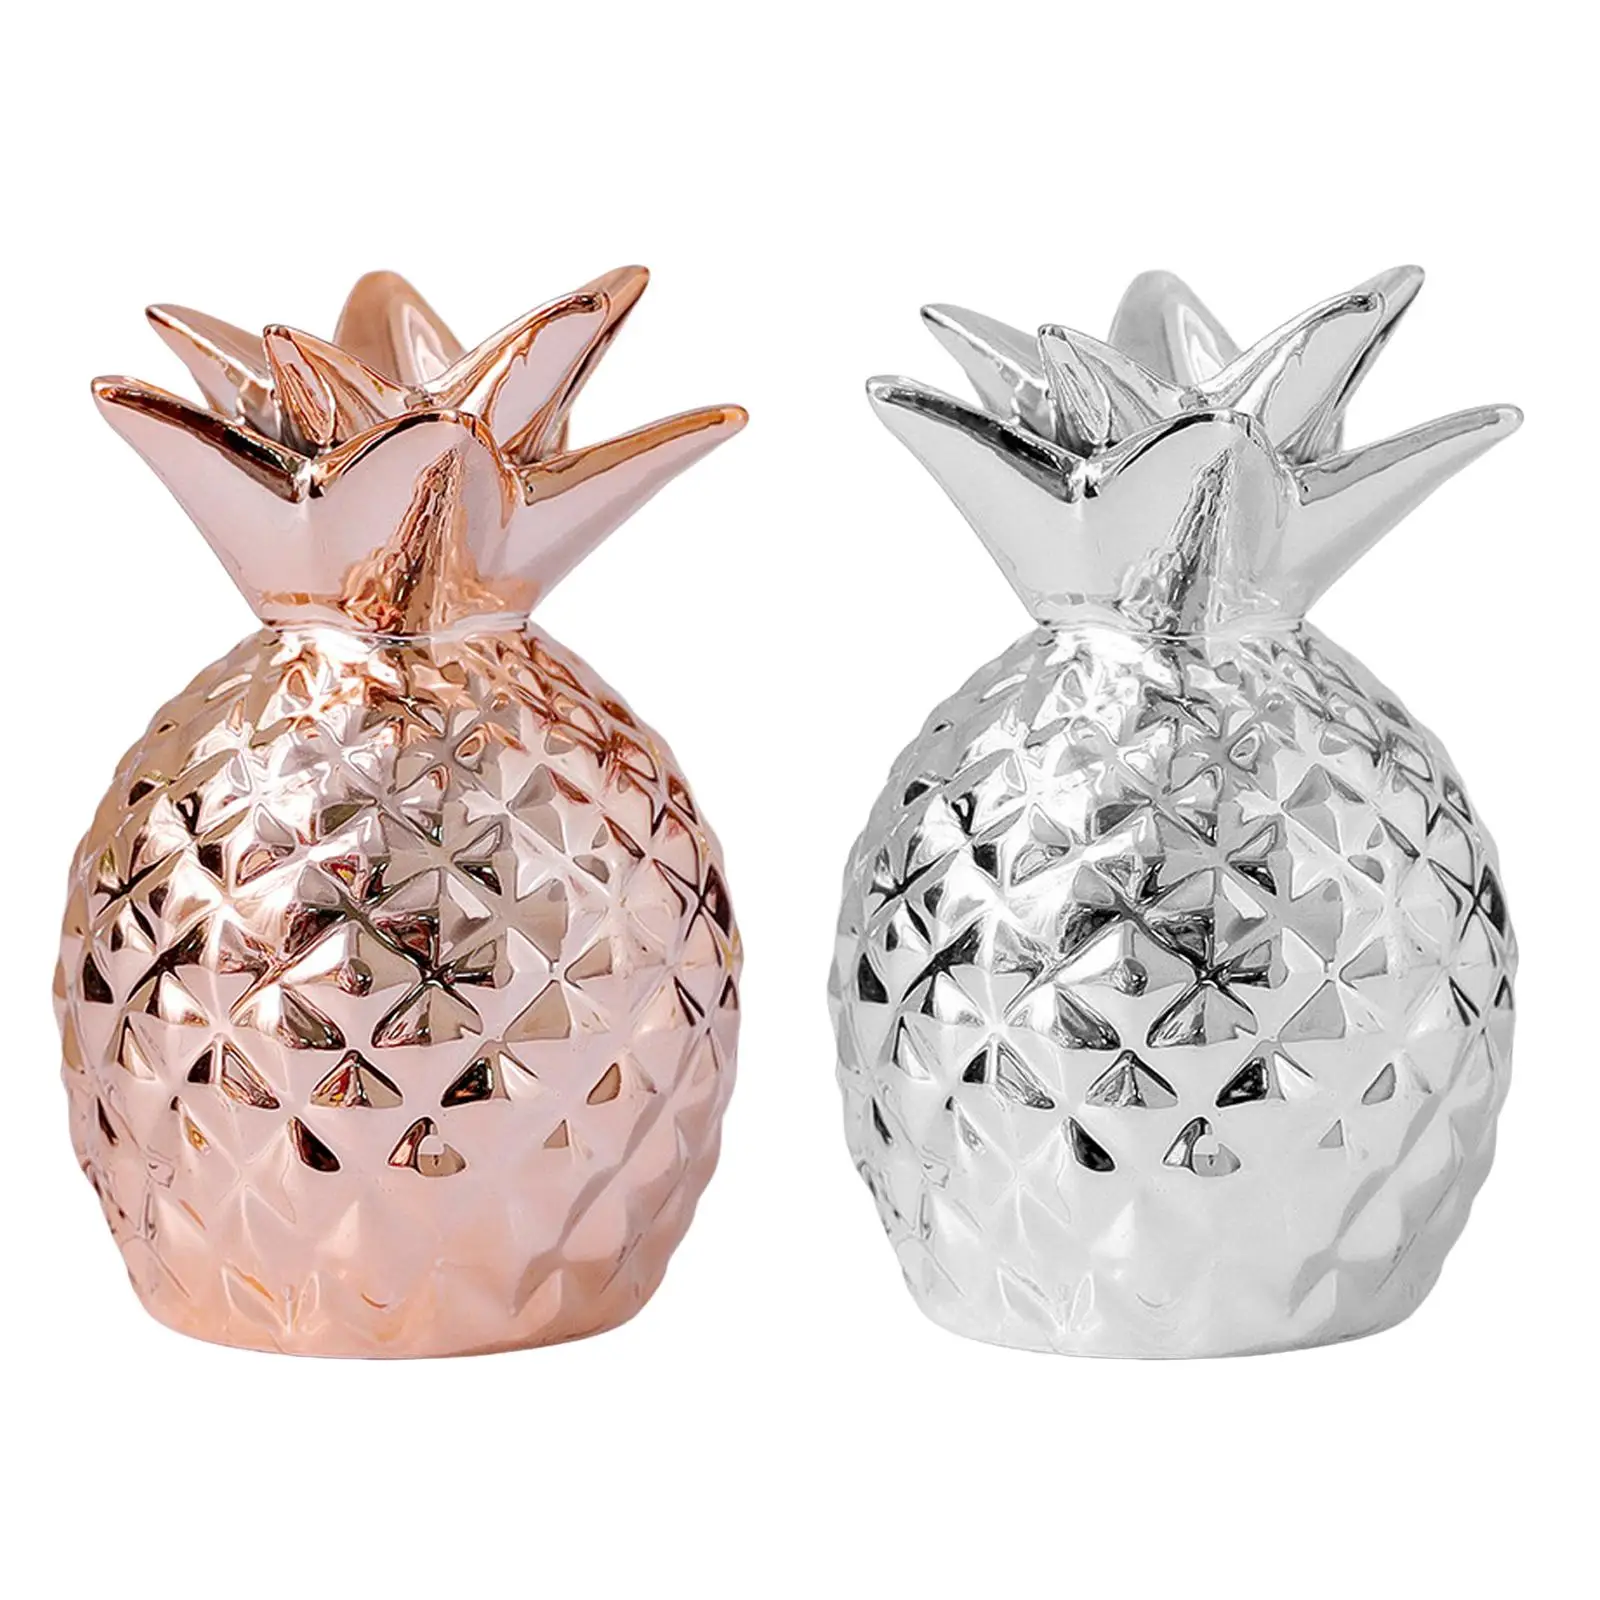 Pineapple Shape Money Box Storage Cans Saving box Decoration Sculpture Holder for Theme Party Apartment Office Bedroom